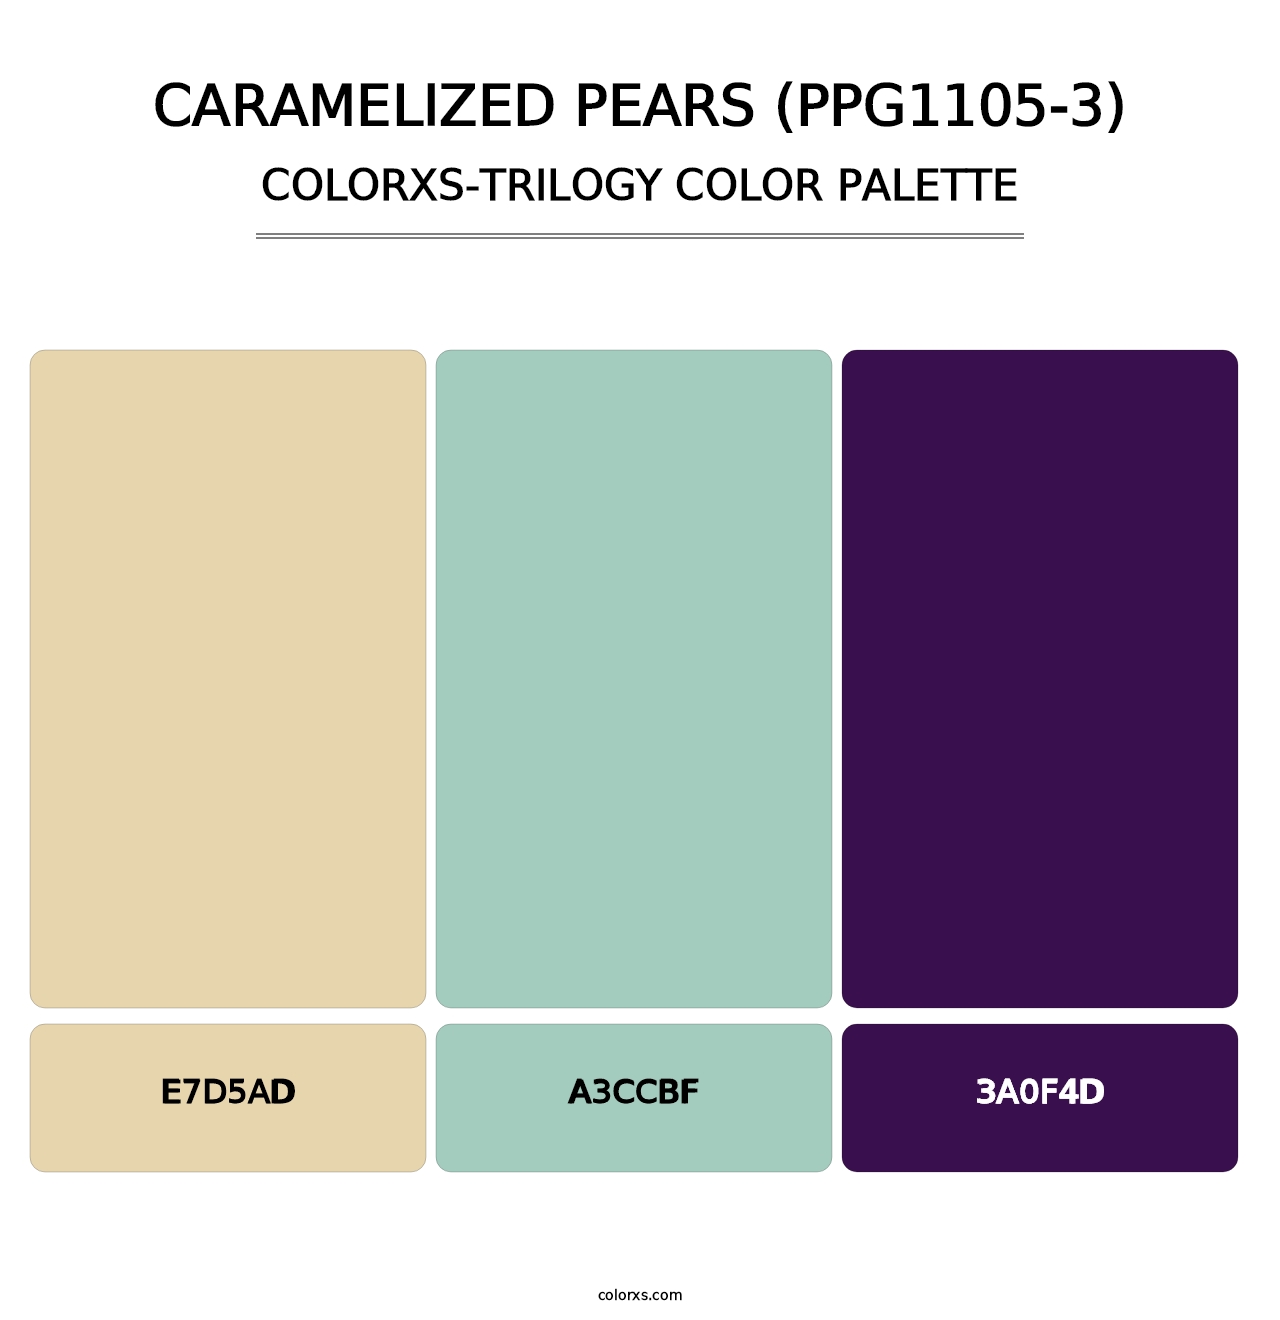 Caramelized Pears (PPG1105-3) - Colorxs Trilogy Palette